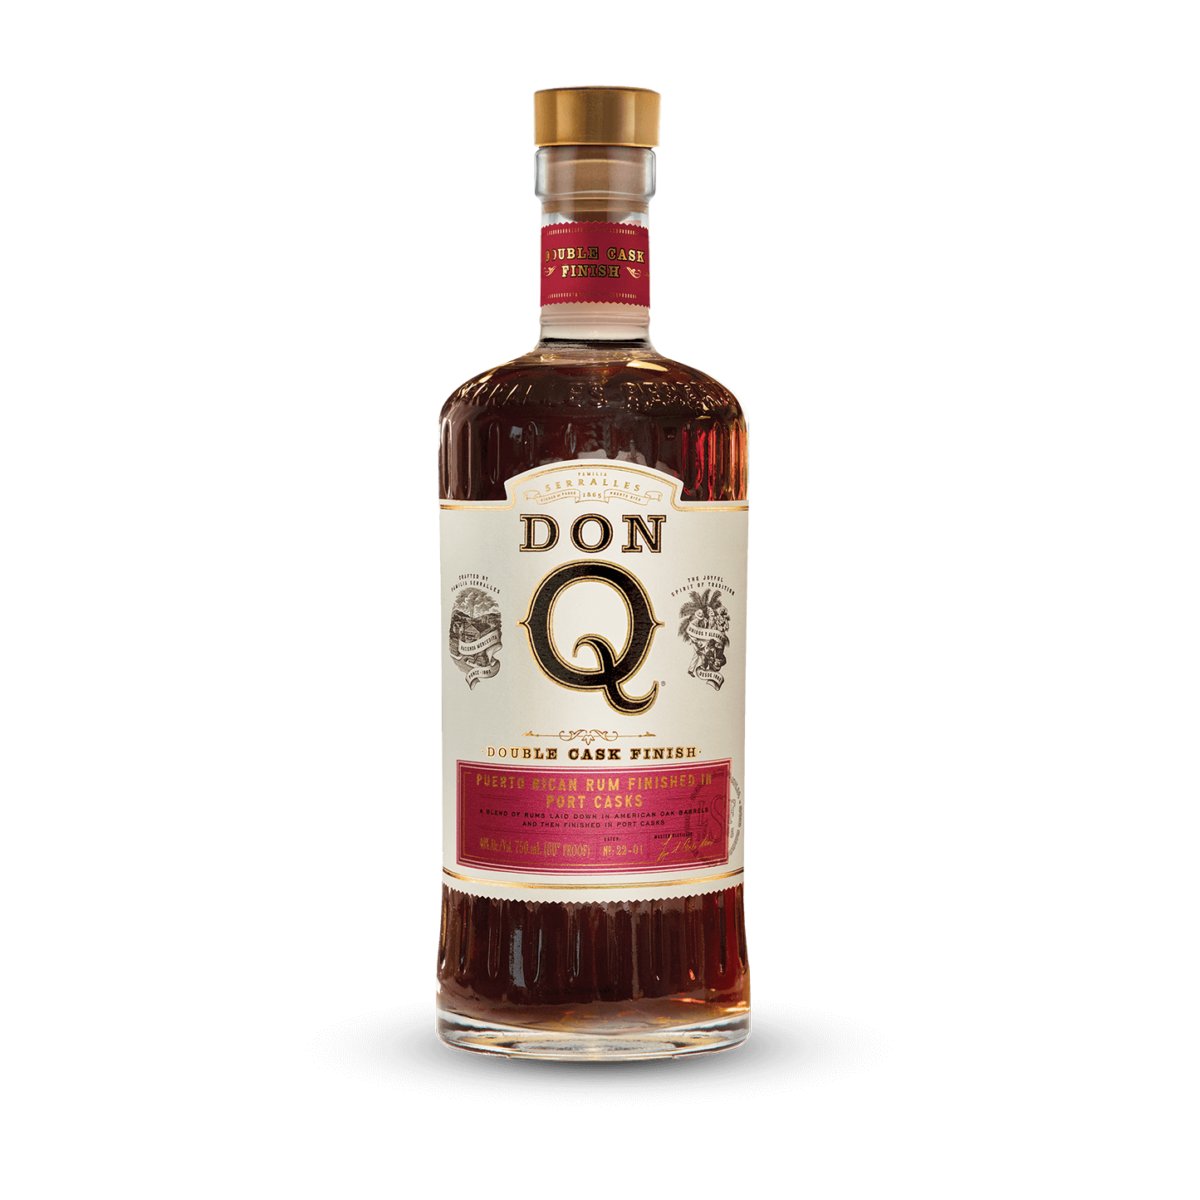 Cask out Check Aged Port Finish our award-winning Double